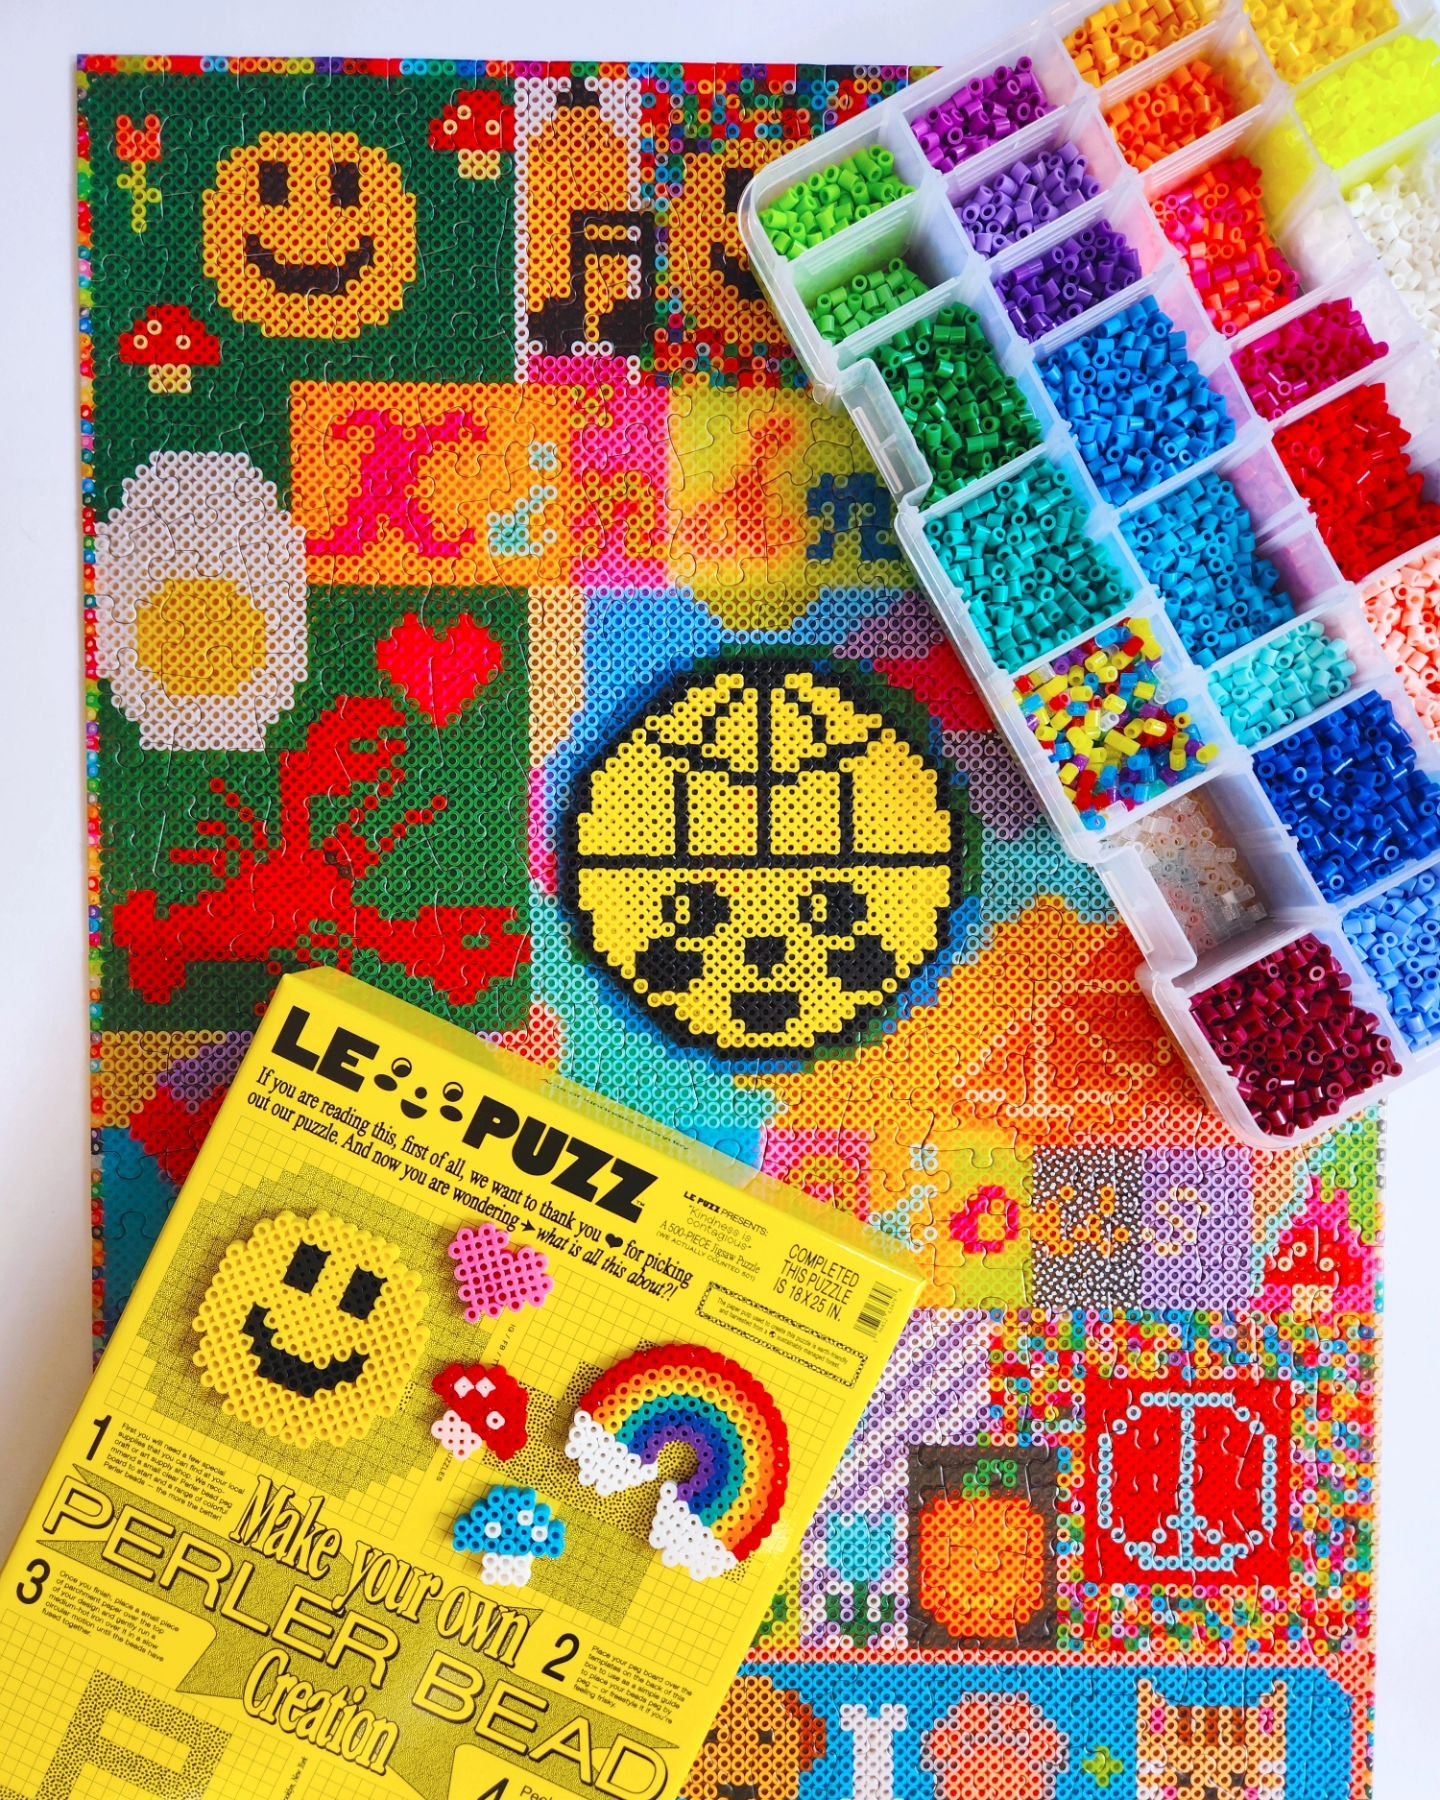 𝕂𝕚𝕟𝕕𝕟𝕖𝕤𝕤 𝕚𝕤 ℂ𝕠𝕟𝕥𝕒𝕘𝕚𝕠𝕦𝕤 💖😃

I absolutely adore this puzzle by @lepuzzpuzzles!! I grew up making tons of perler beads, and I was just obsessed. I still make some every once in a while, such as holiday ornaments. I was even inspired